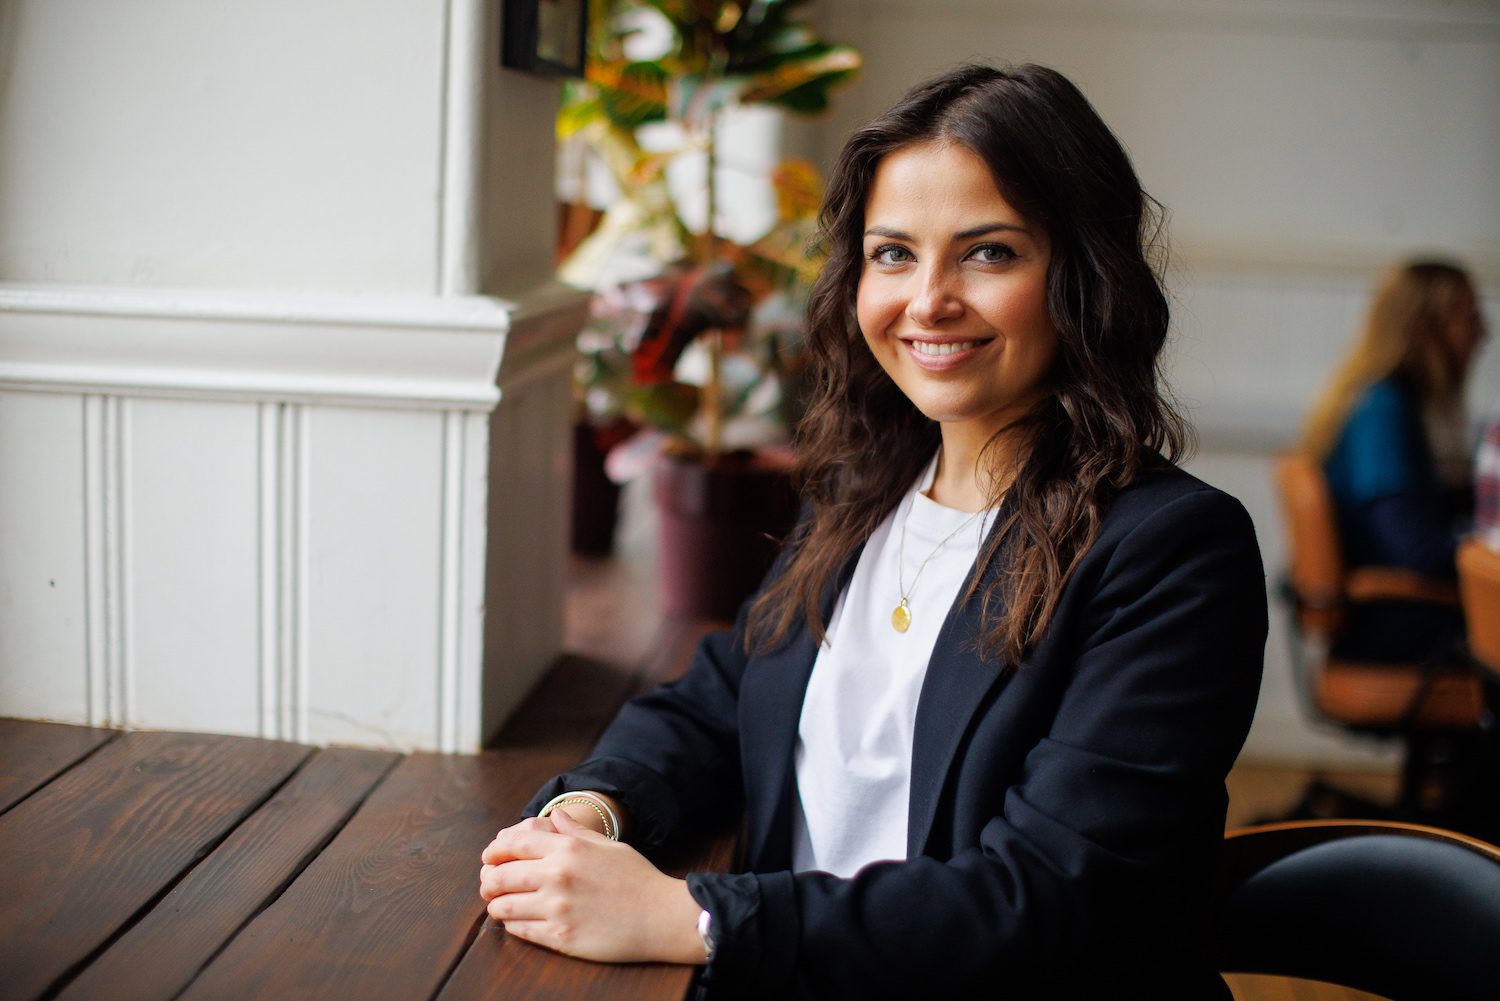 Hotfoot appoints Verity Agababian as Marketing Lead